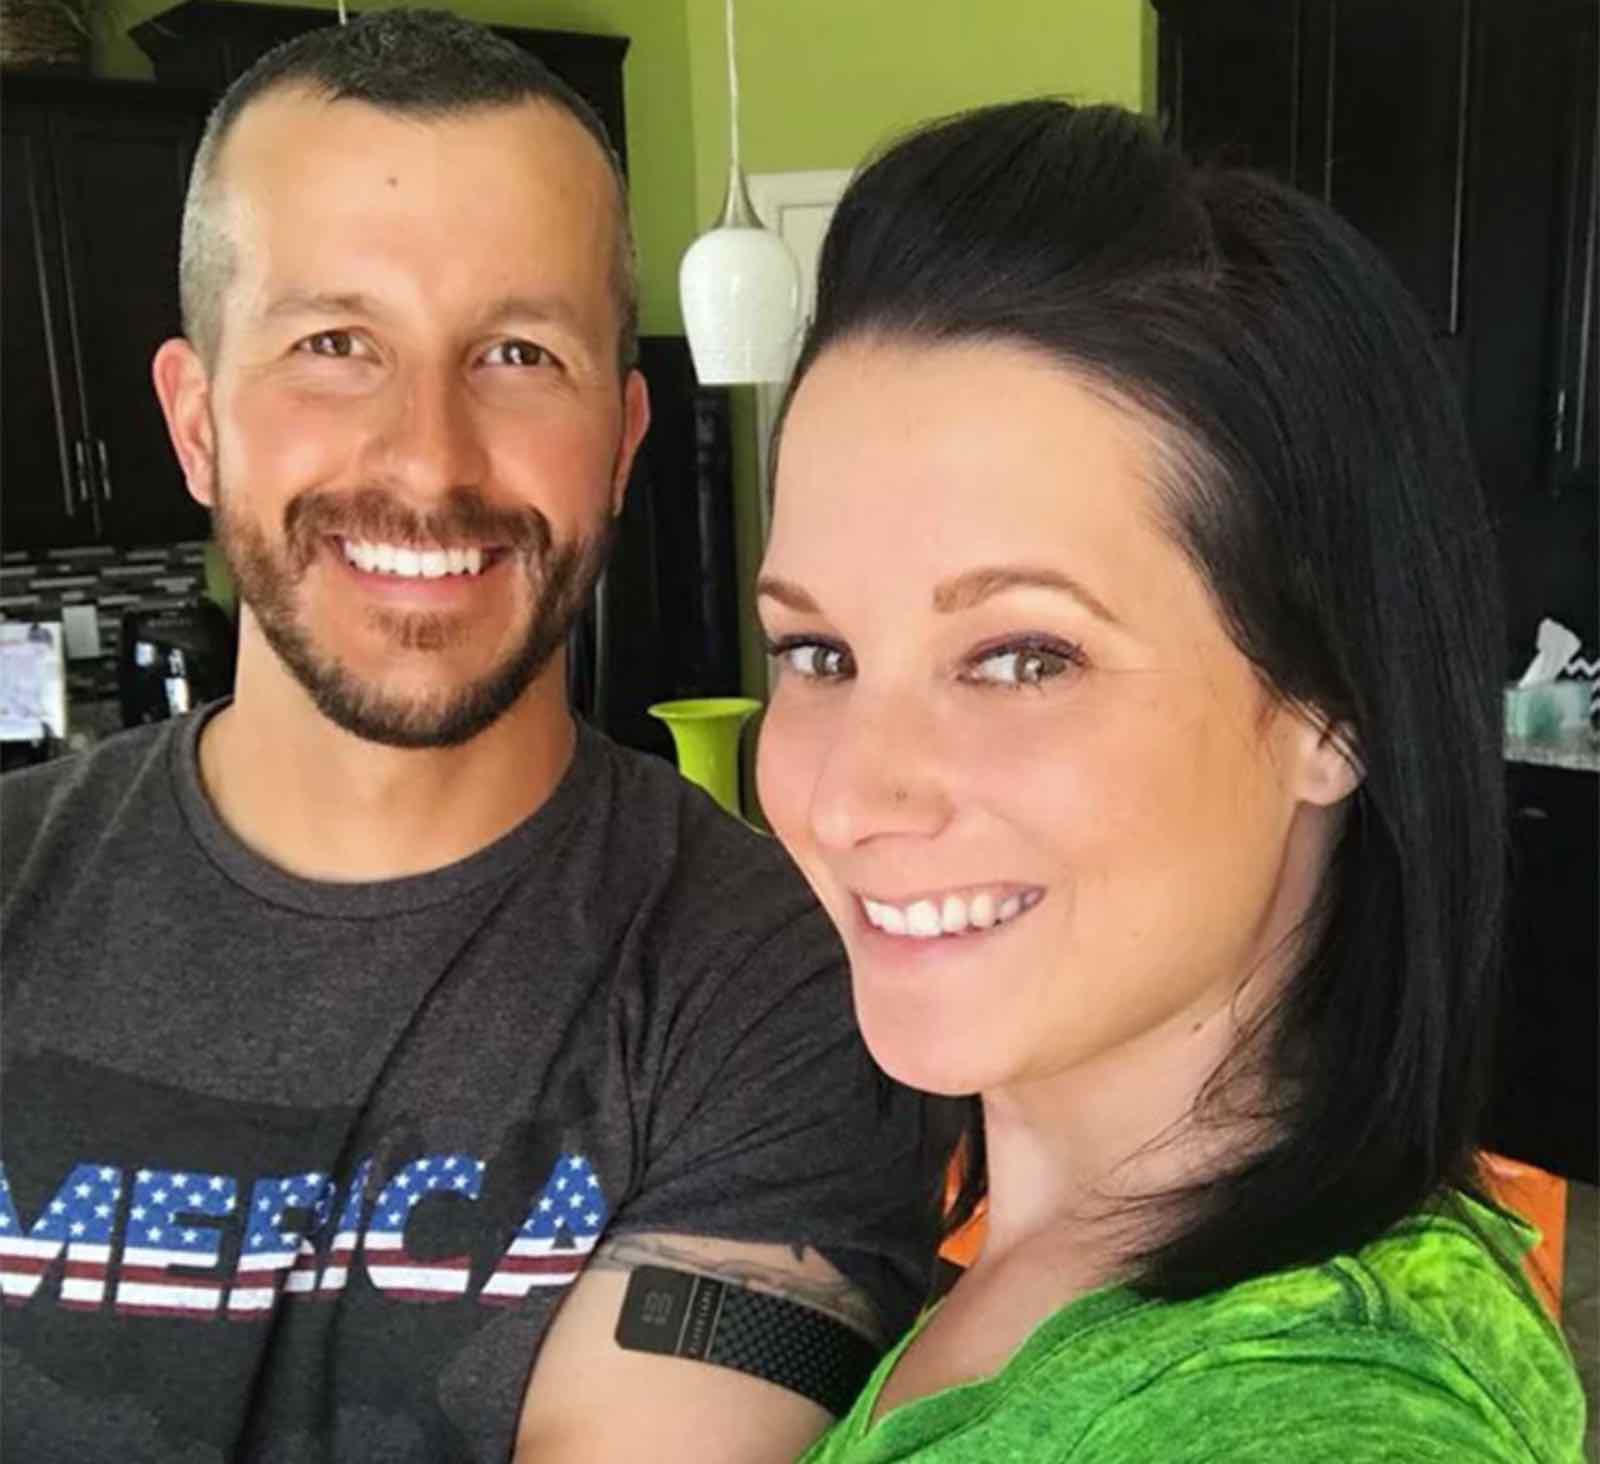 Before he killed his pregnant wife Shanann, Chris Watts was telling her lie after lie to trick her into thinking he was happy.